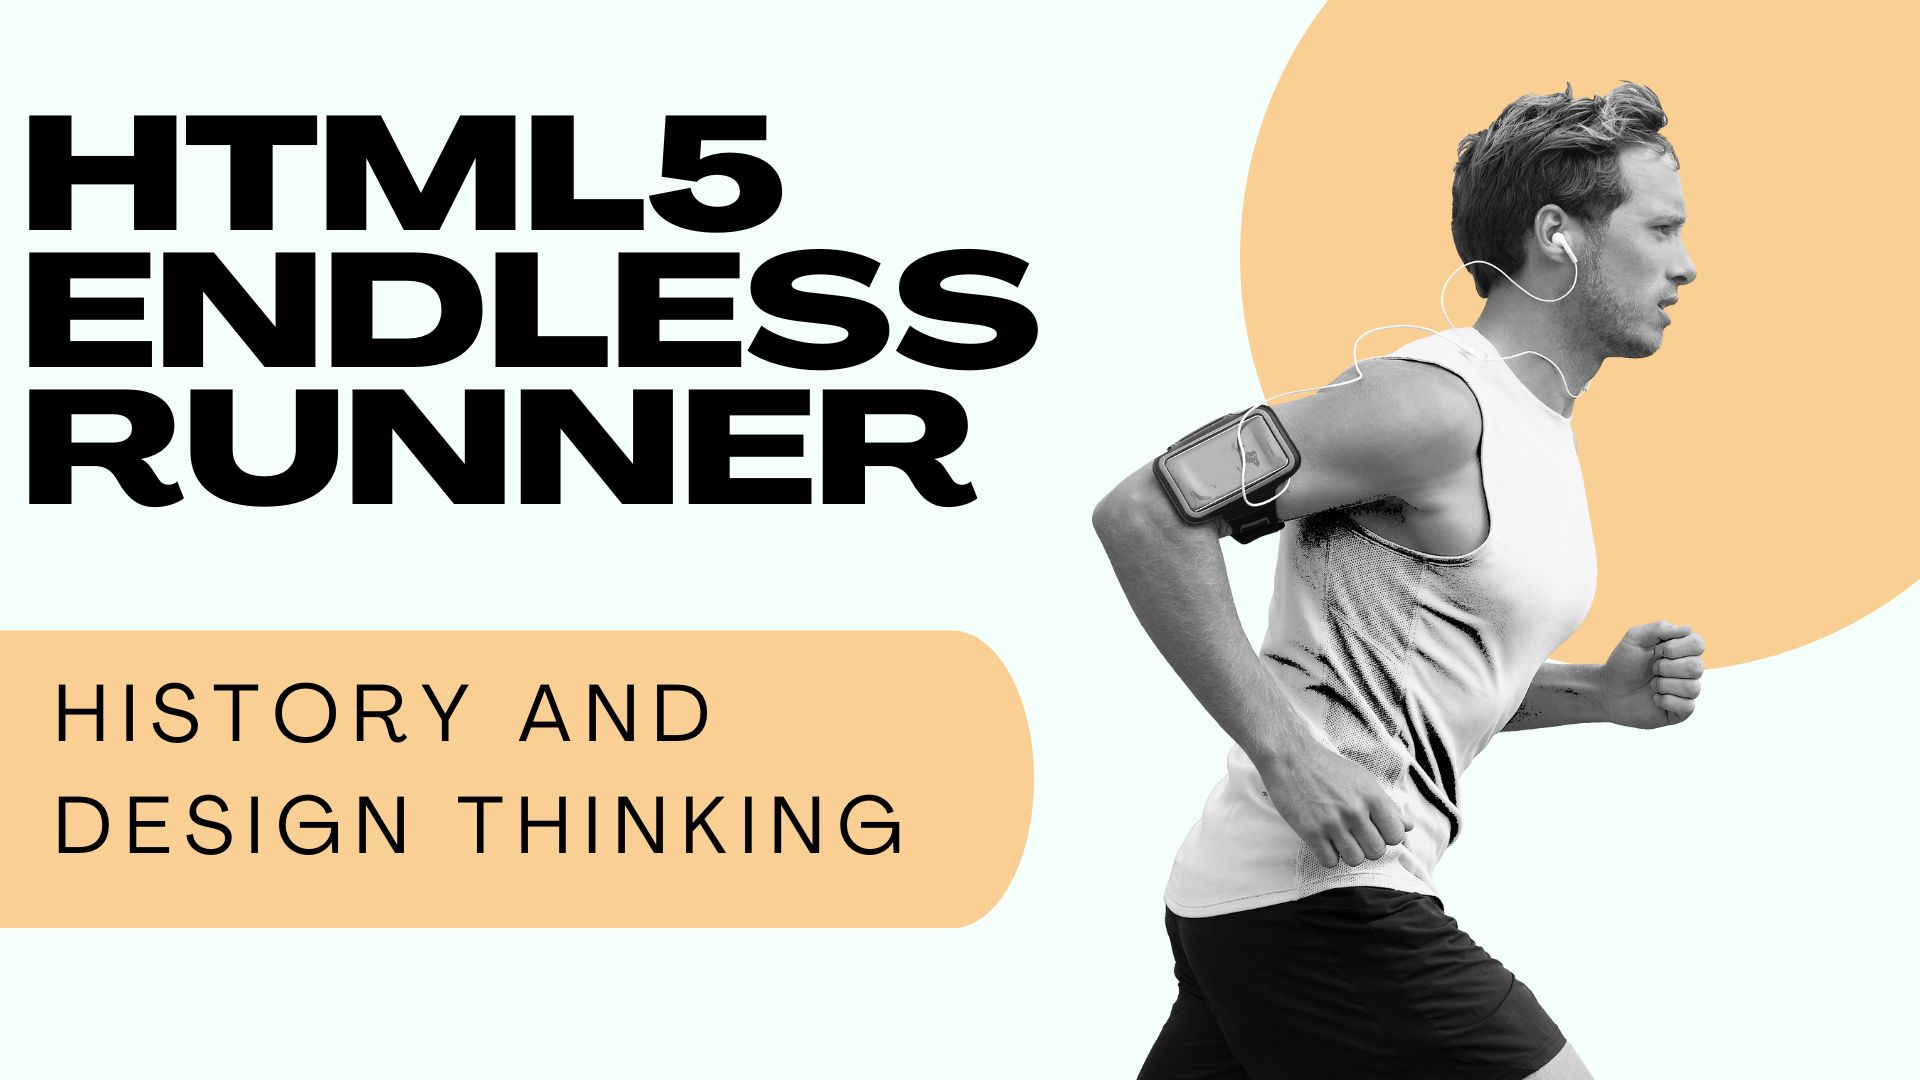 HTML5 Endless Runner - History and Design Thinking